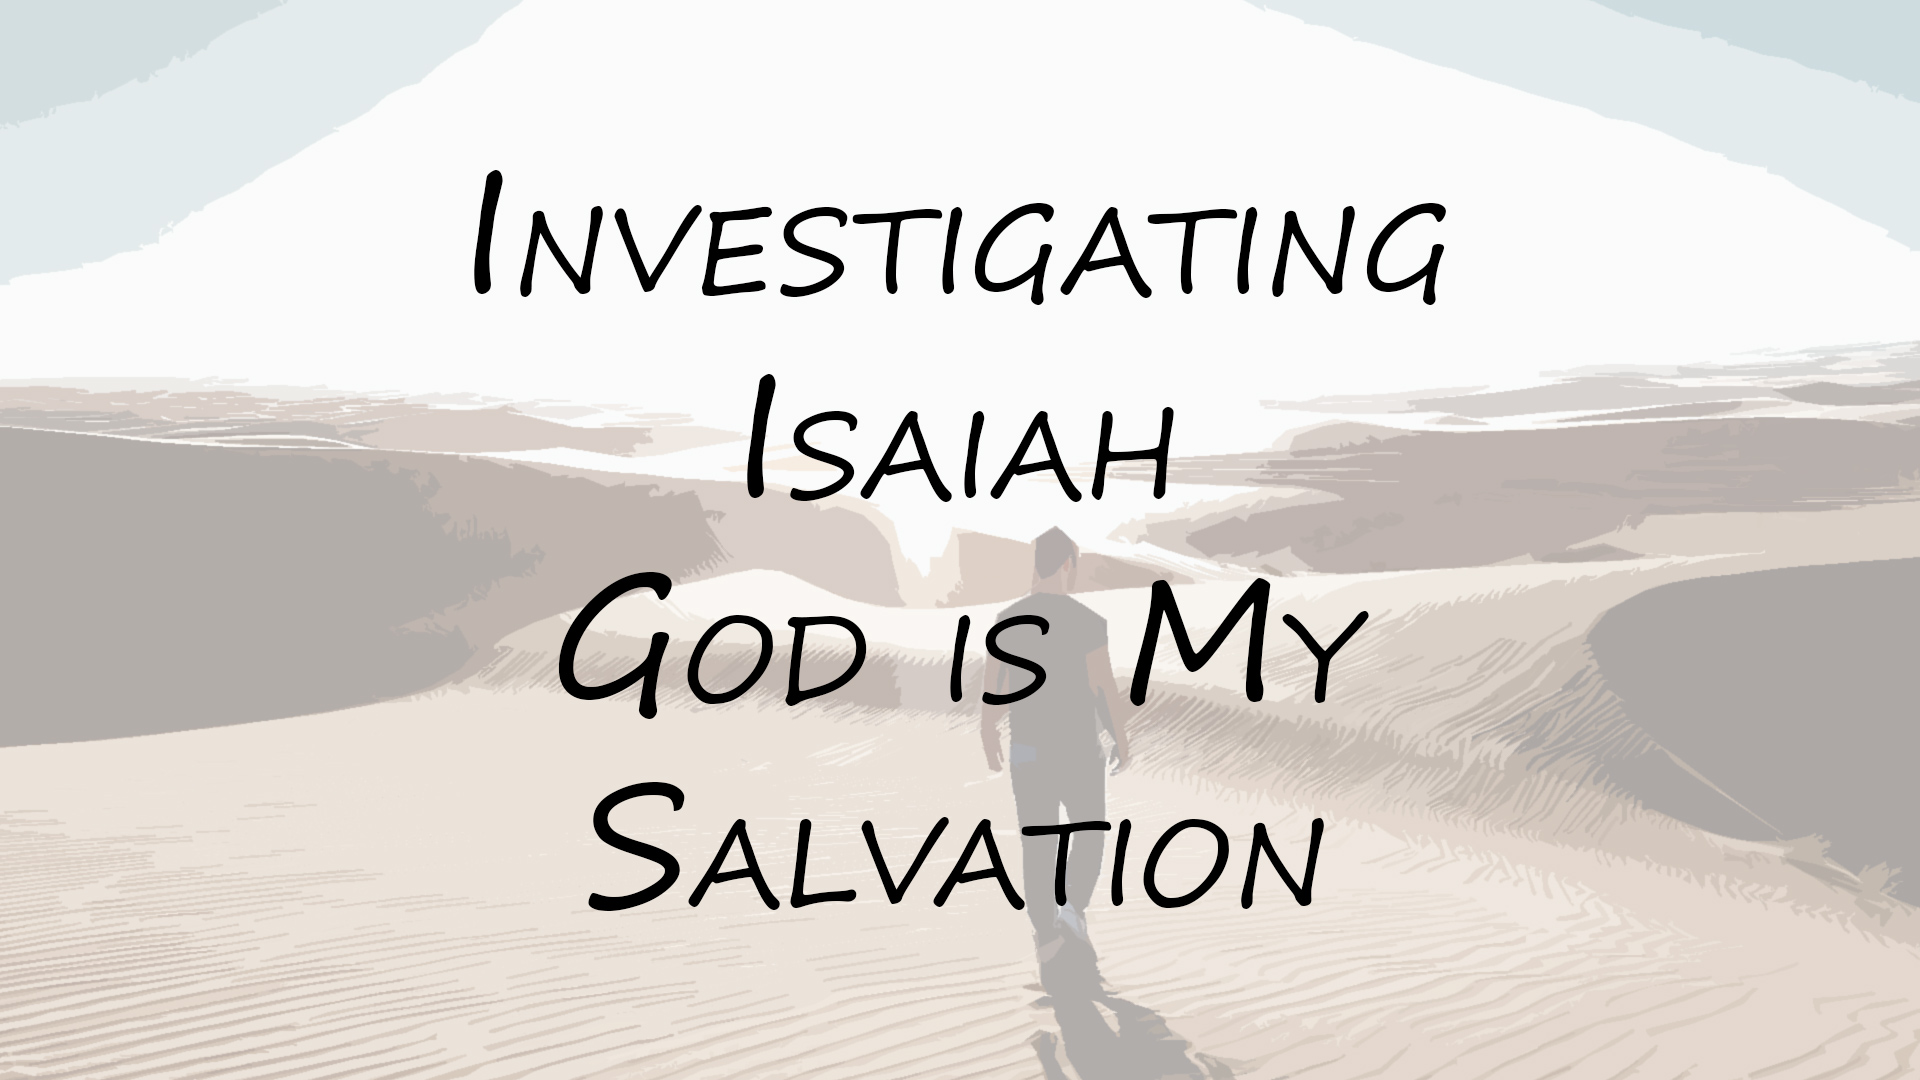 Investigating Isaiah God is my salvation